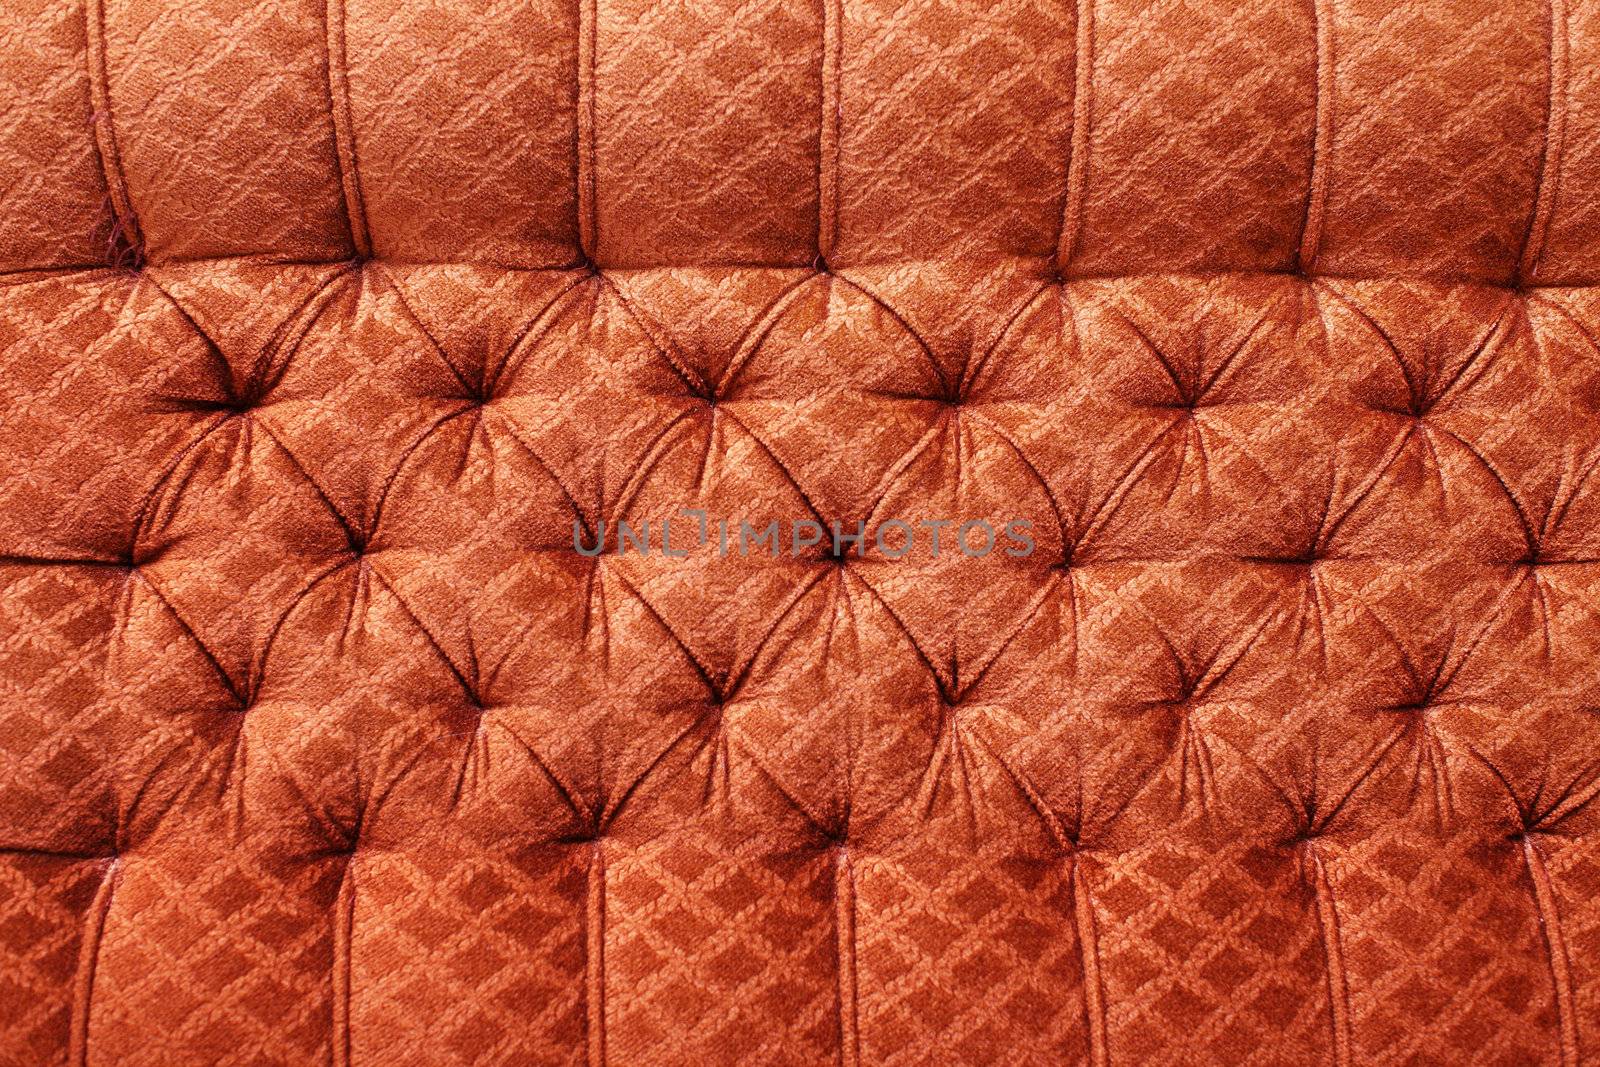 Bright red antique furniture upholstery - the background